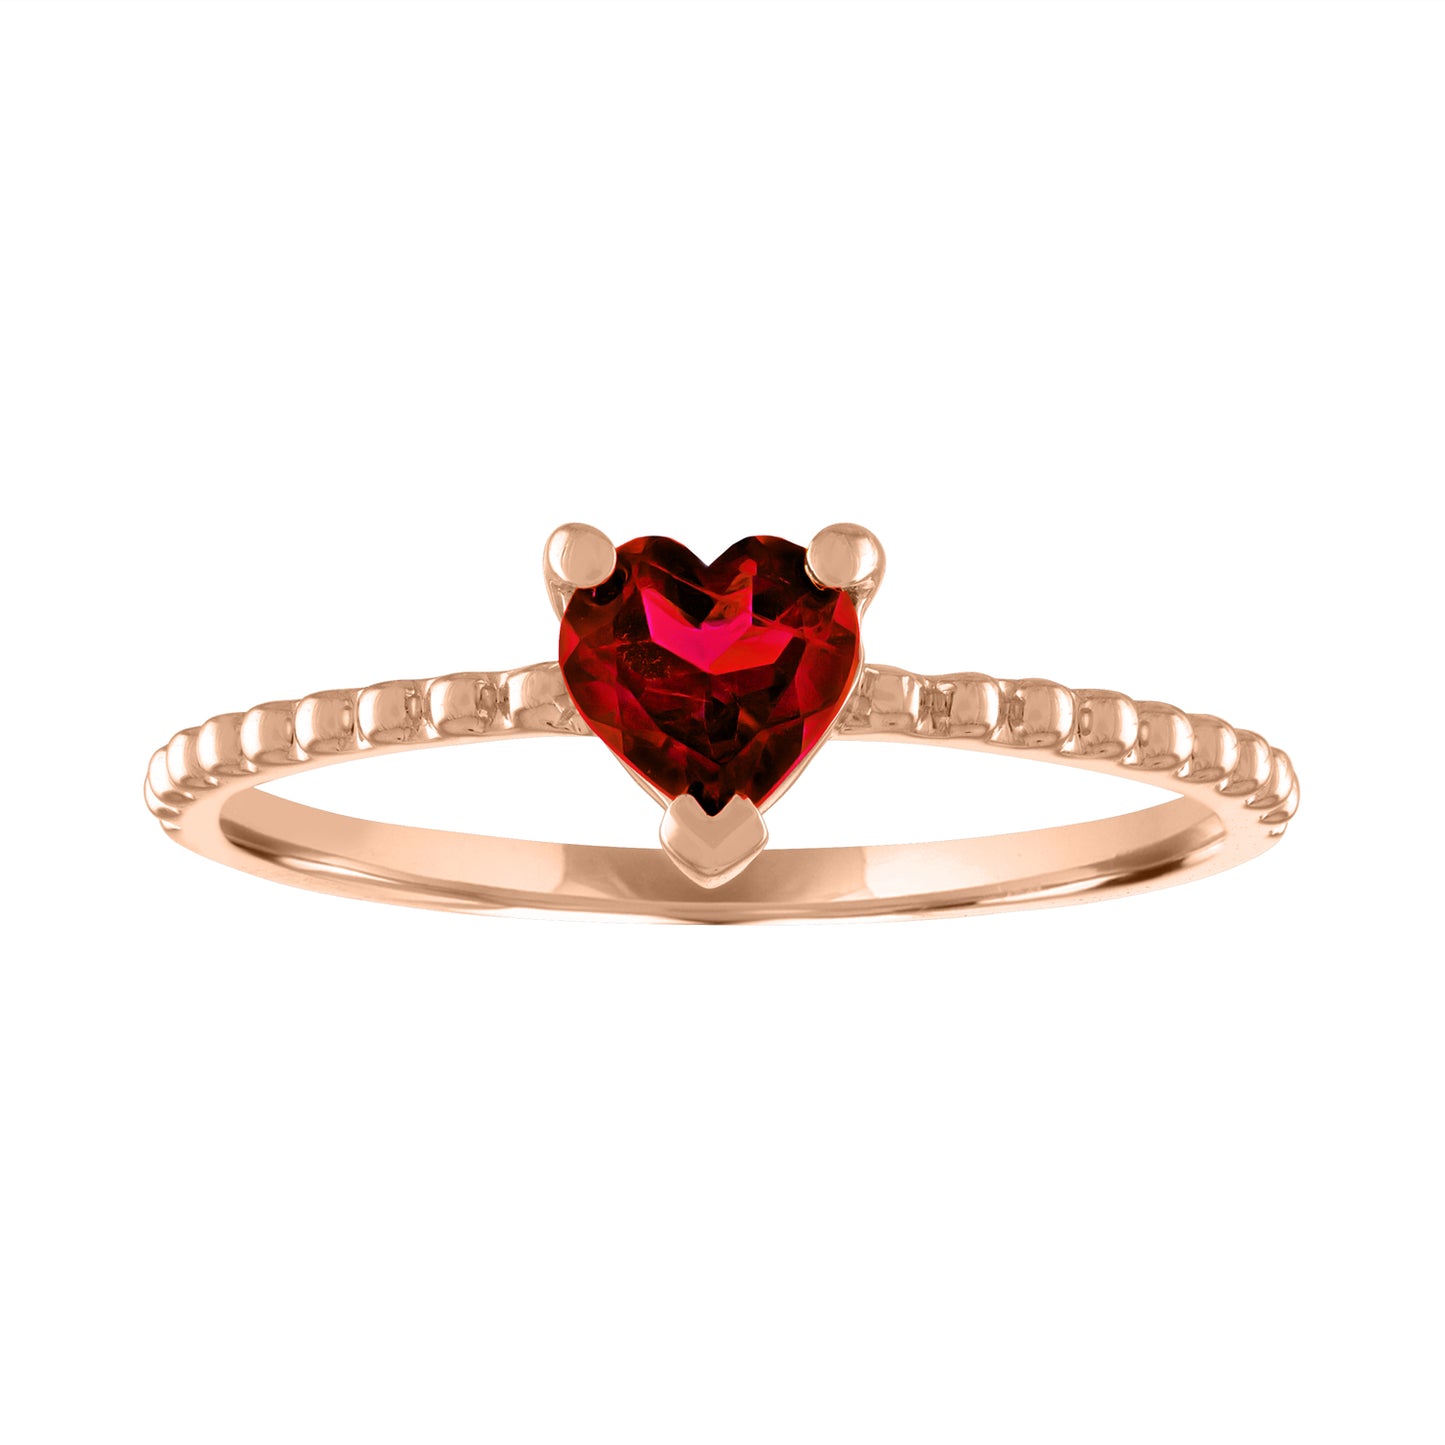 Rose gold beaded skinny band with a heart shaped garnet in the center. 